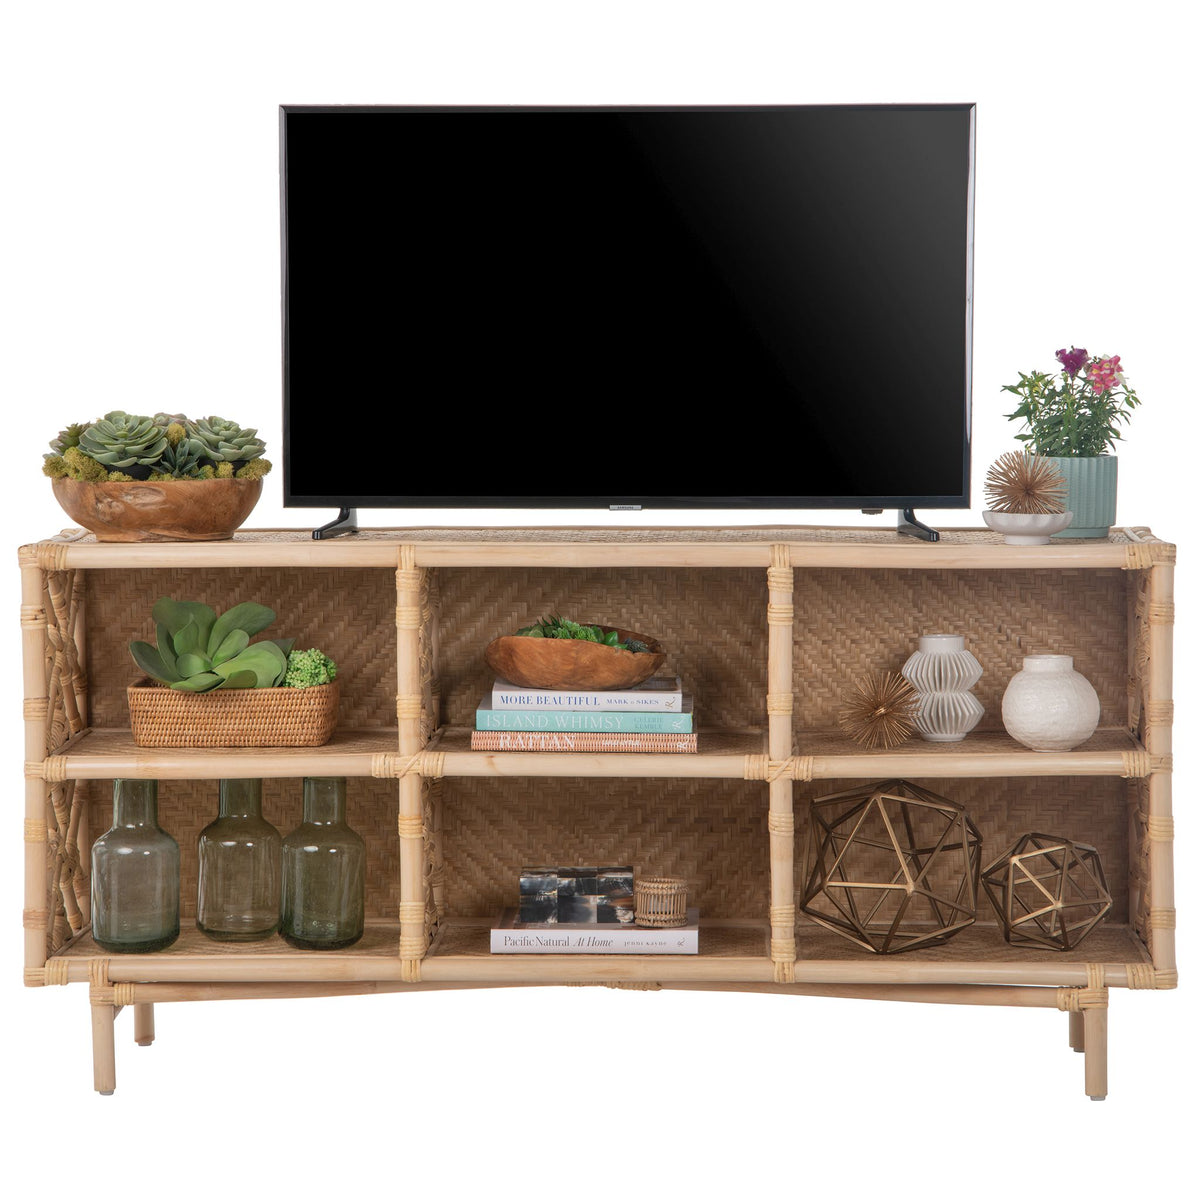 Chippendale Rattan Bookshelf & Console Table with 6 Slots for Storage - Freestanding Display Unit with Fixed Shelves